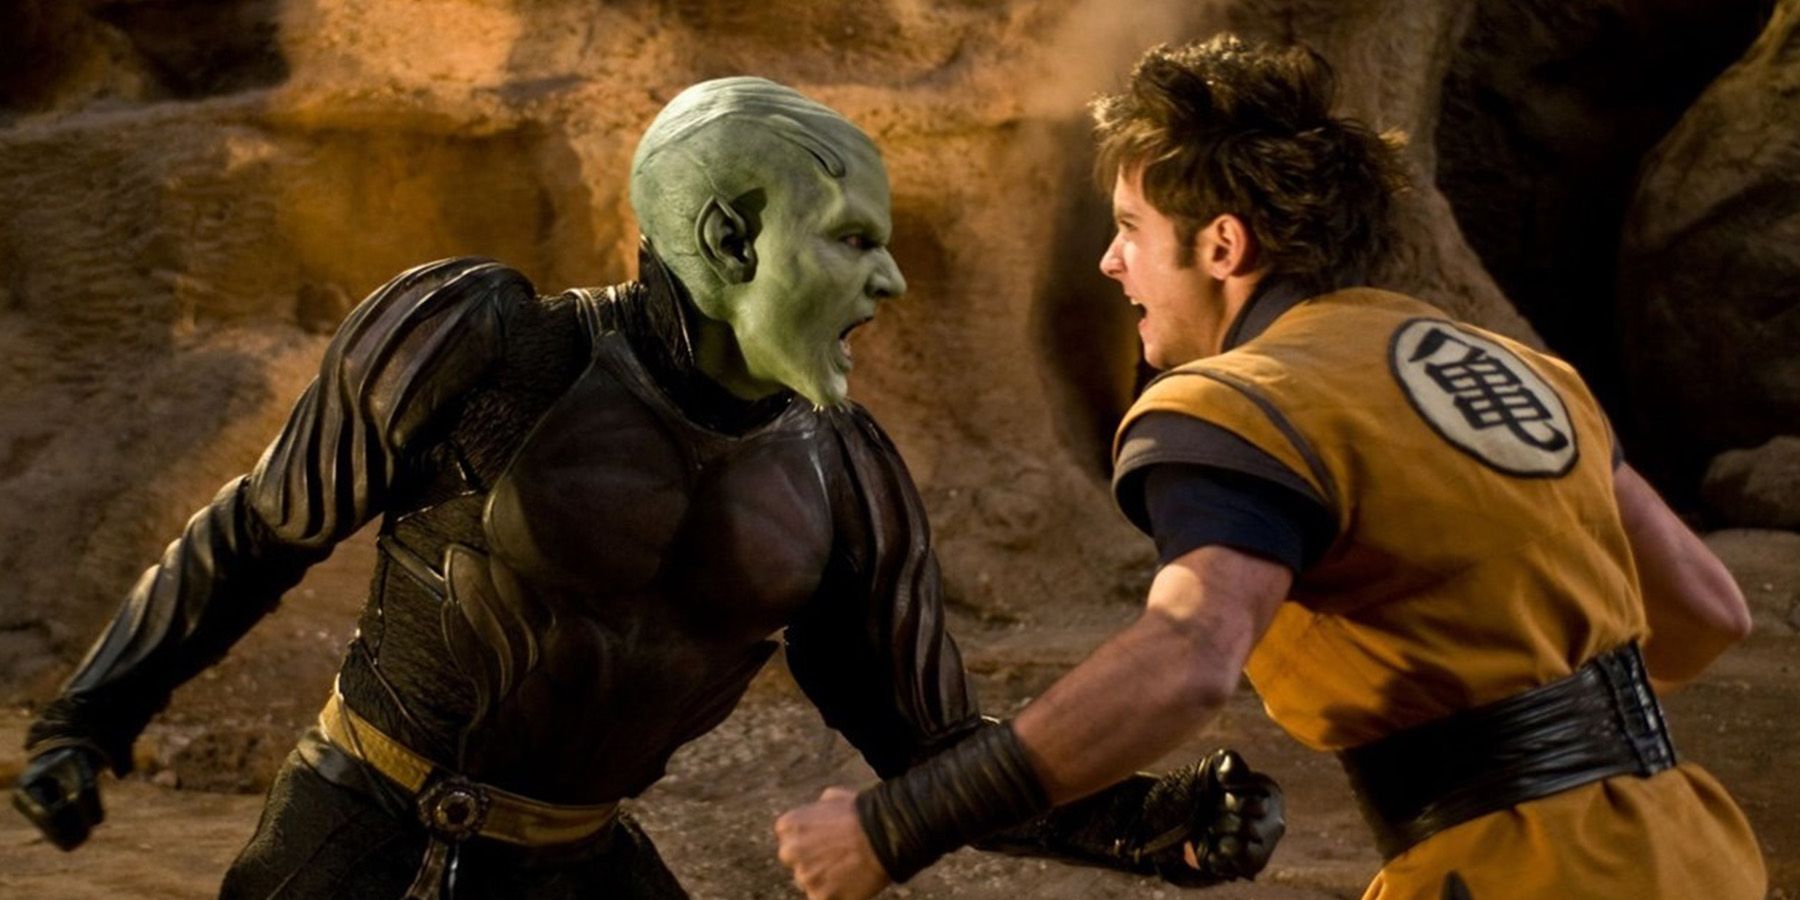 Reasons Piccolo went wrong in DragonBall Evolution